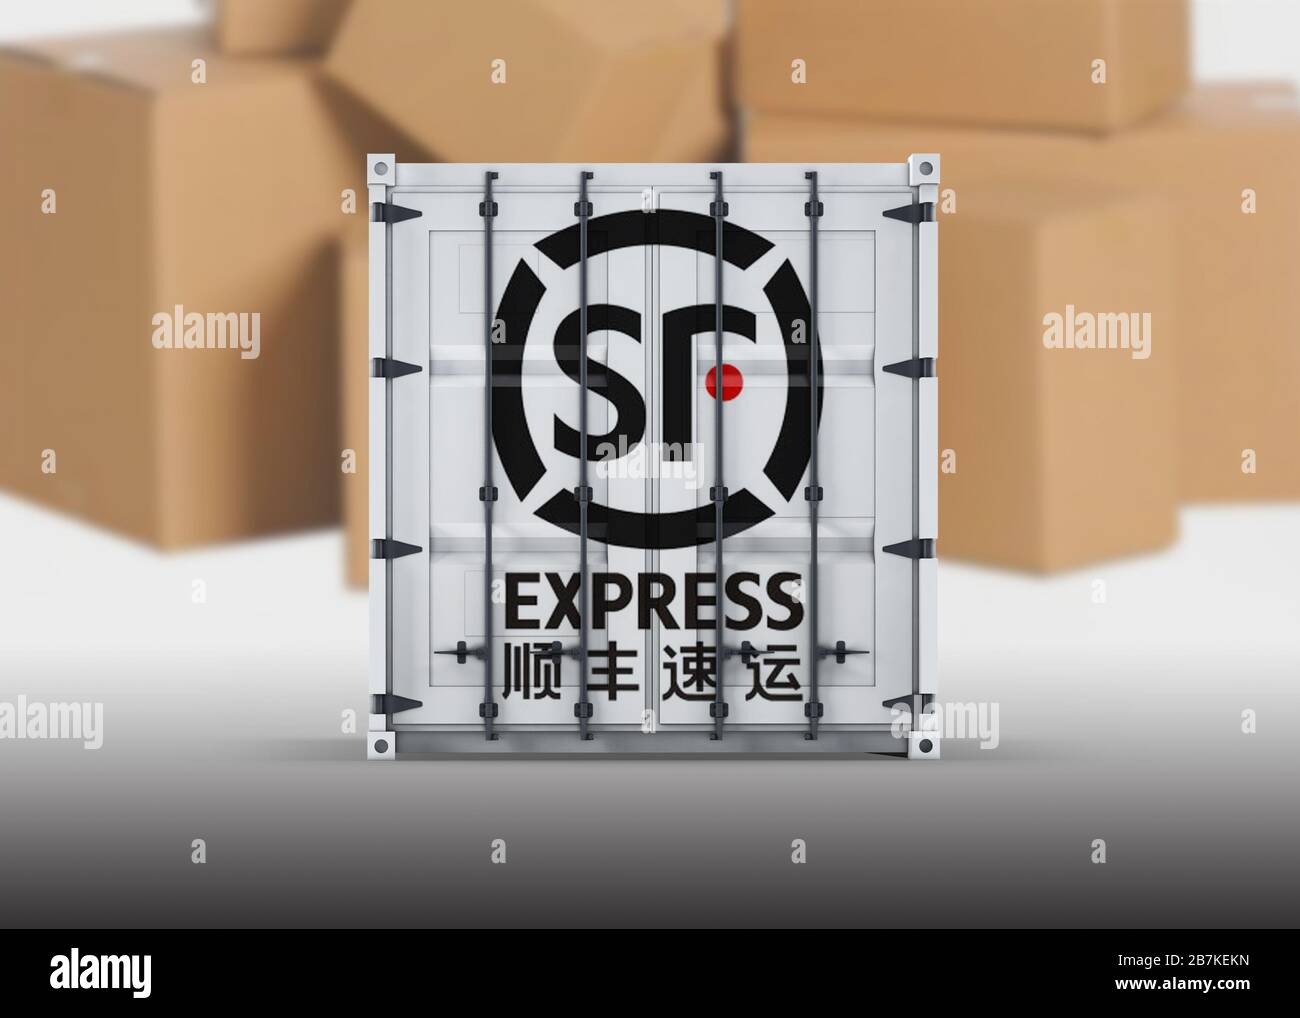 Creative photo: A SF Express logo against a background of delivery boxes. Stock Photo